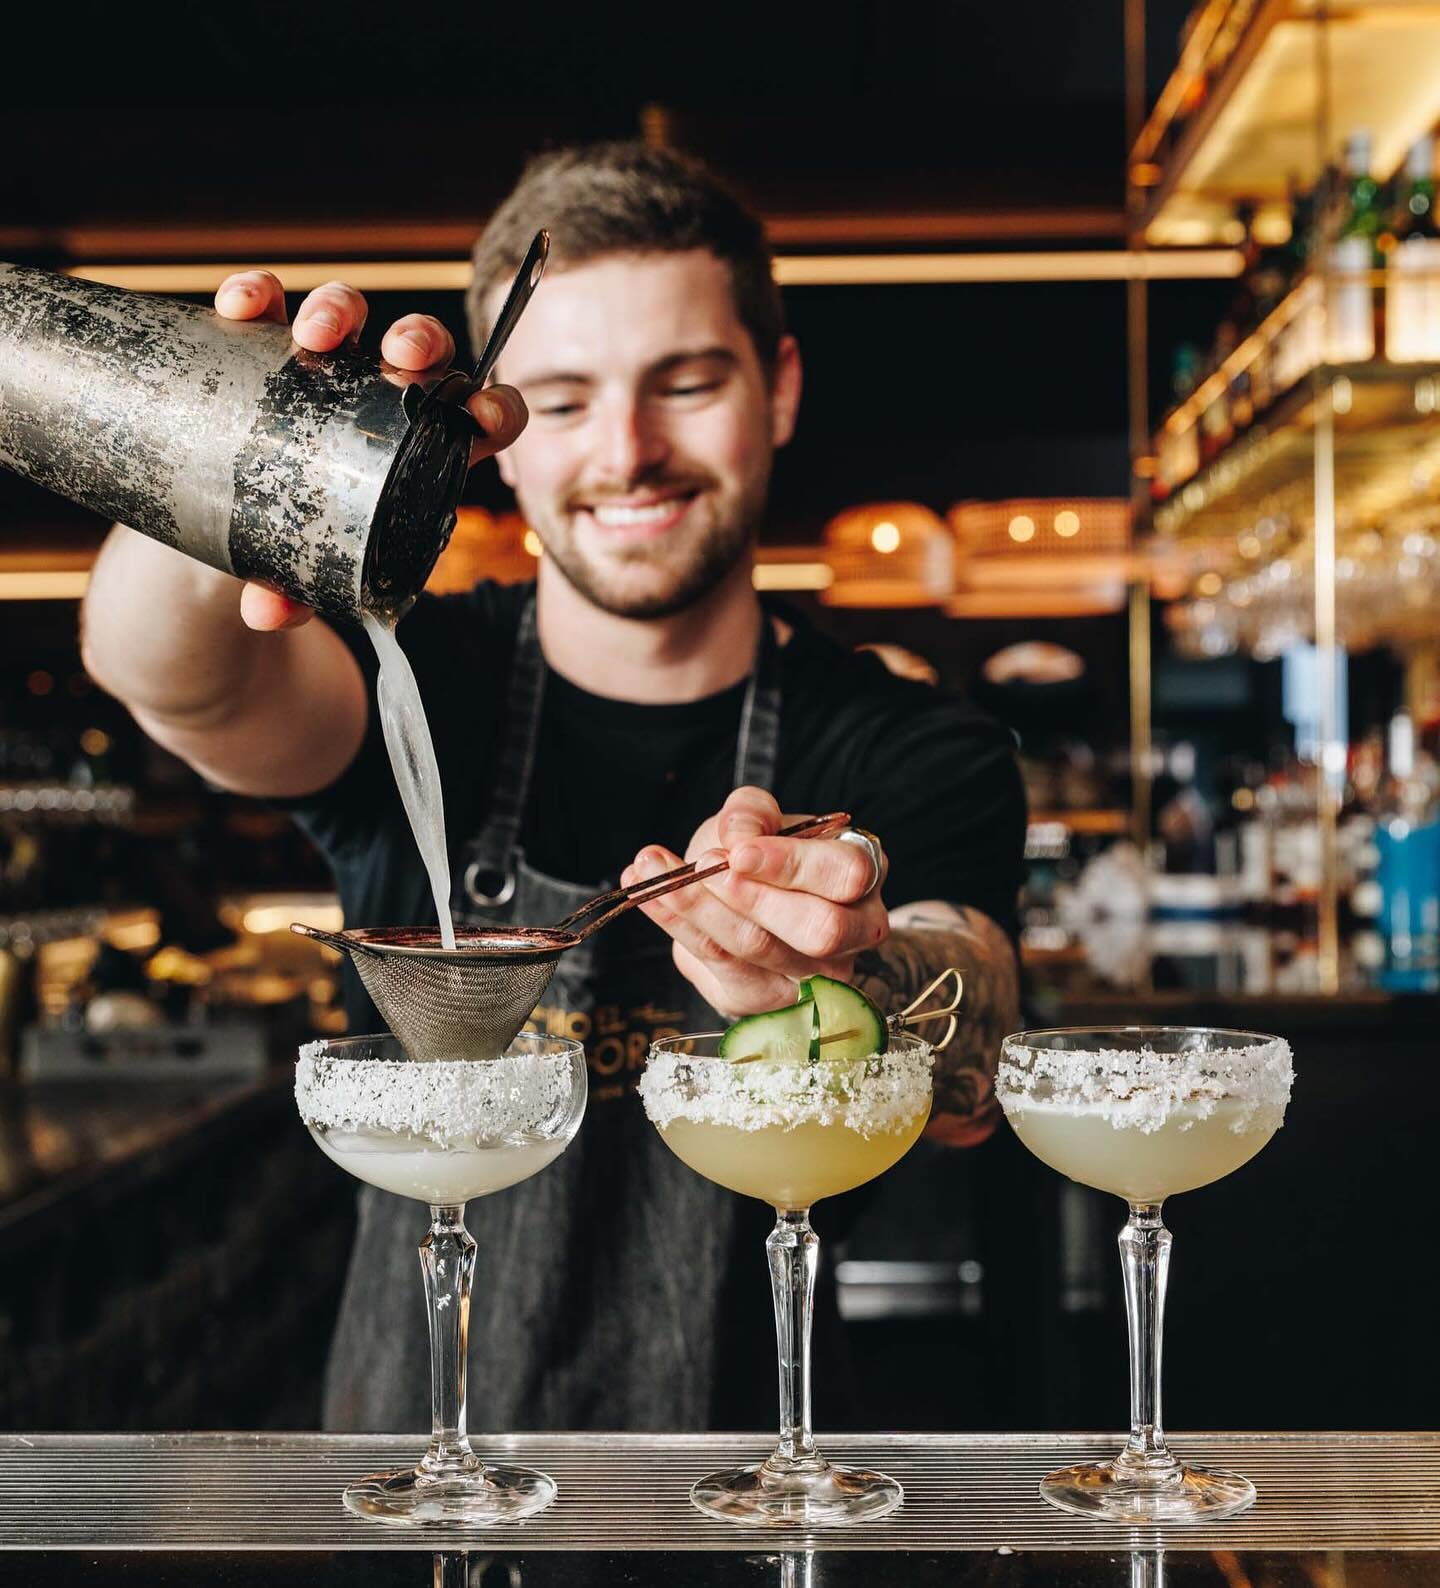 Happy Cinco De Mayo - Kick back with Luke and the crew, Marg in hand, and groove to our Sunday live tunes. 

Choose from:

- Classic
- Coconut
- Chilli and Cucumber

Sunday funday, our way - See you soon!

#HotelGosford #CincoDeMayo